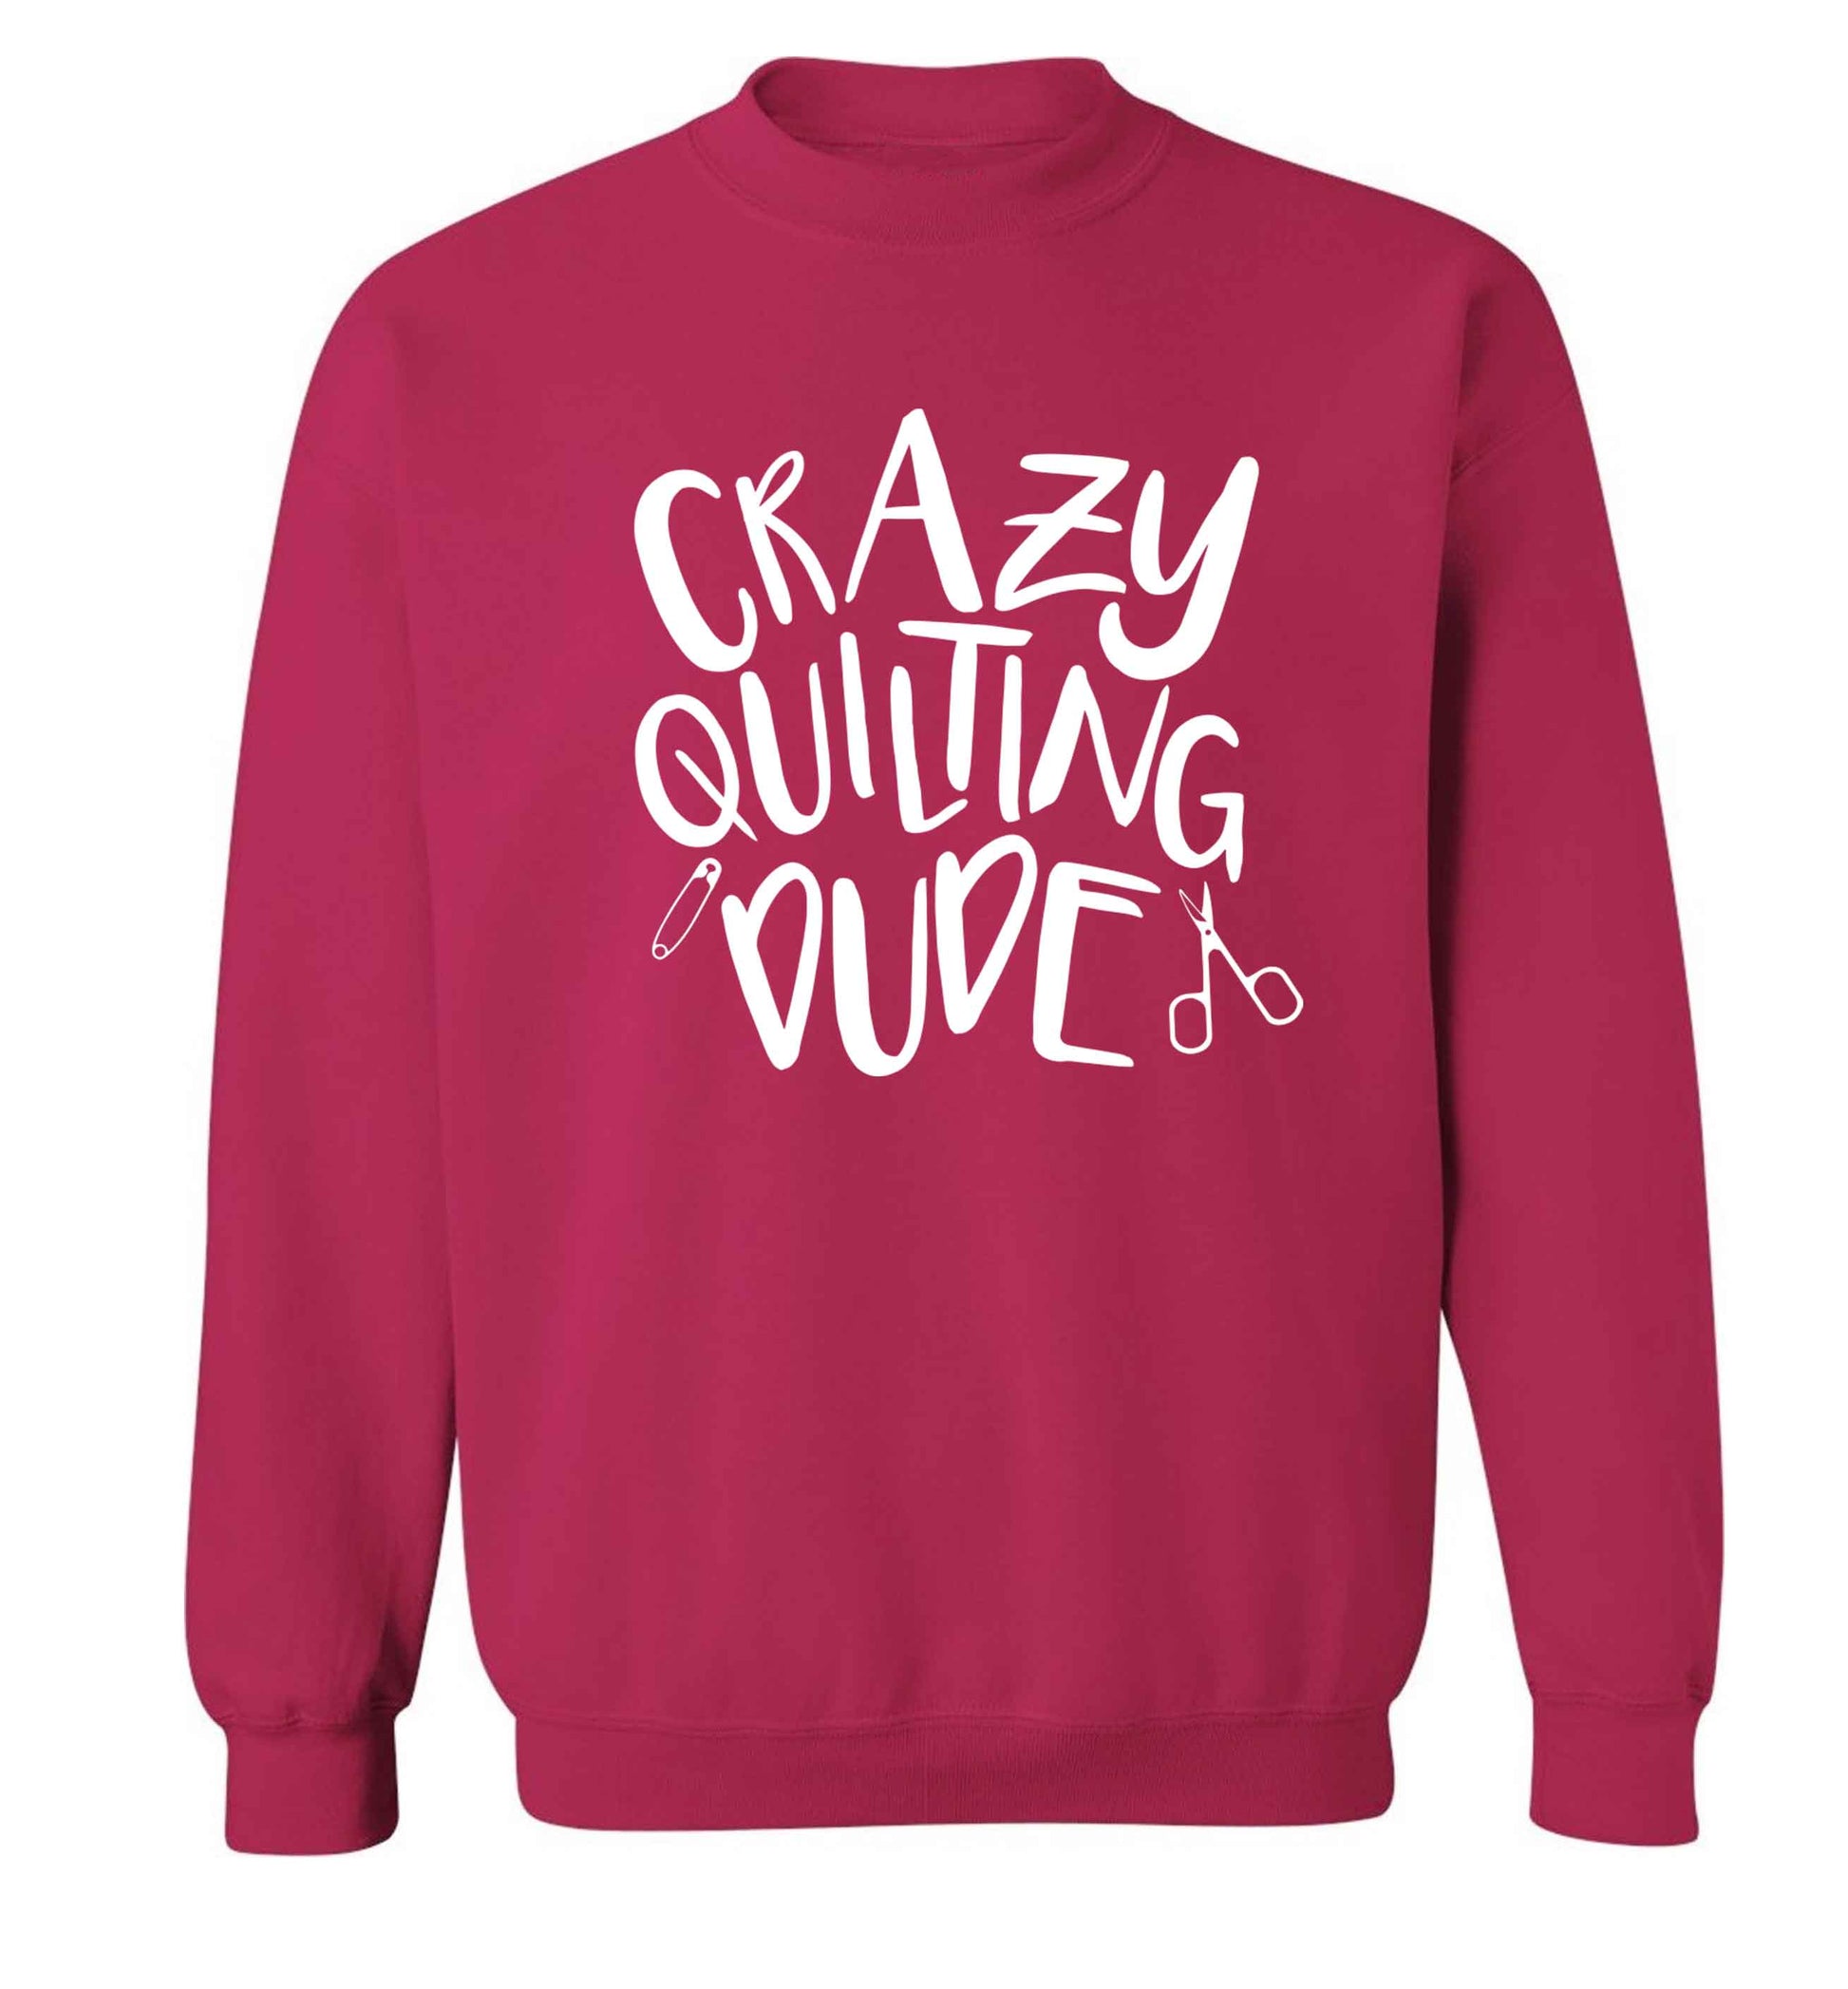 Crazy quilting dude Adult's unisex pink Sweater 2XL